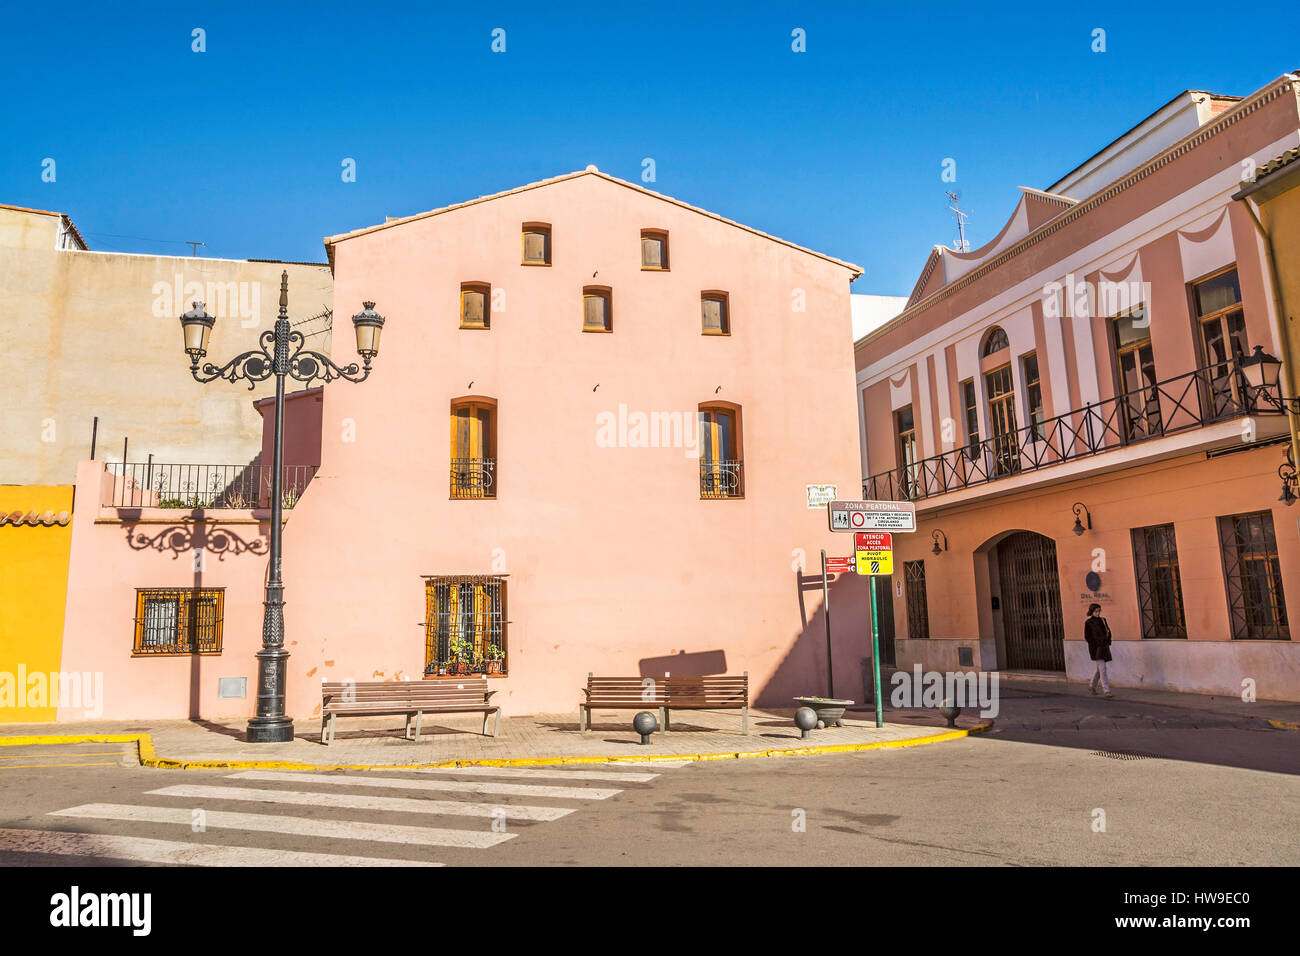 Colorful town buildings in  the province of Valencia, Spain Stock Photo